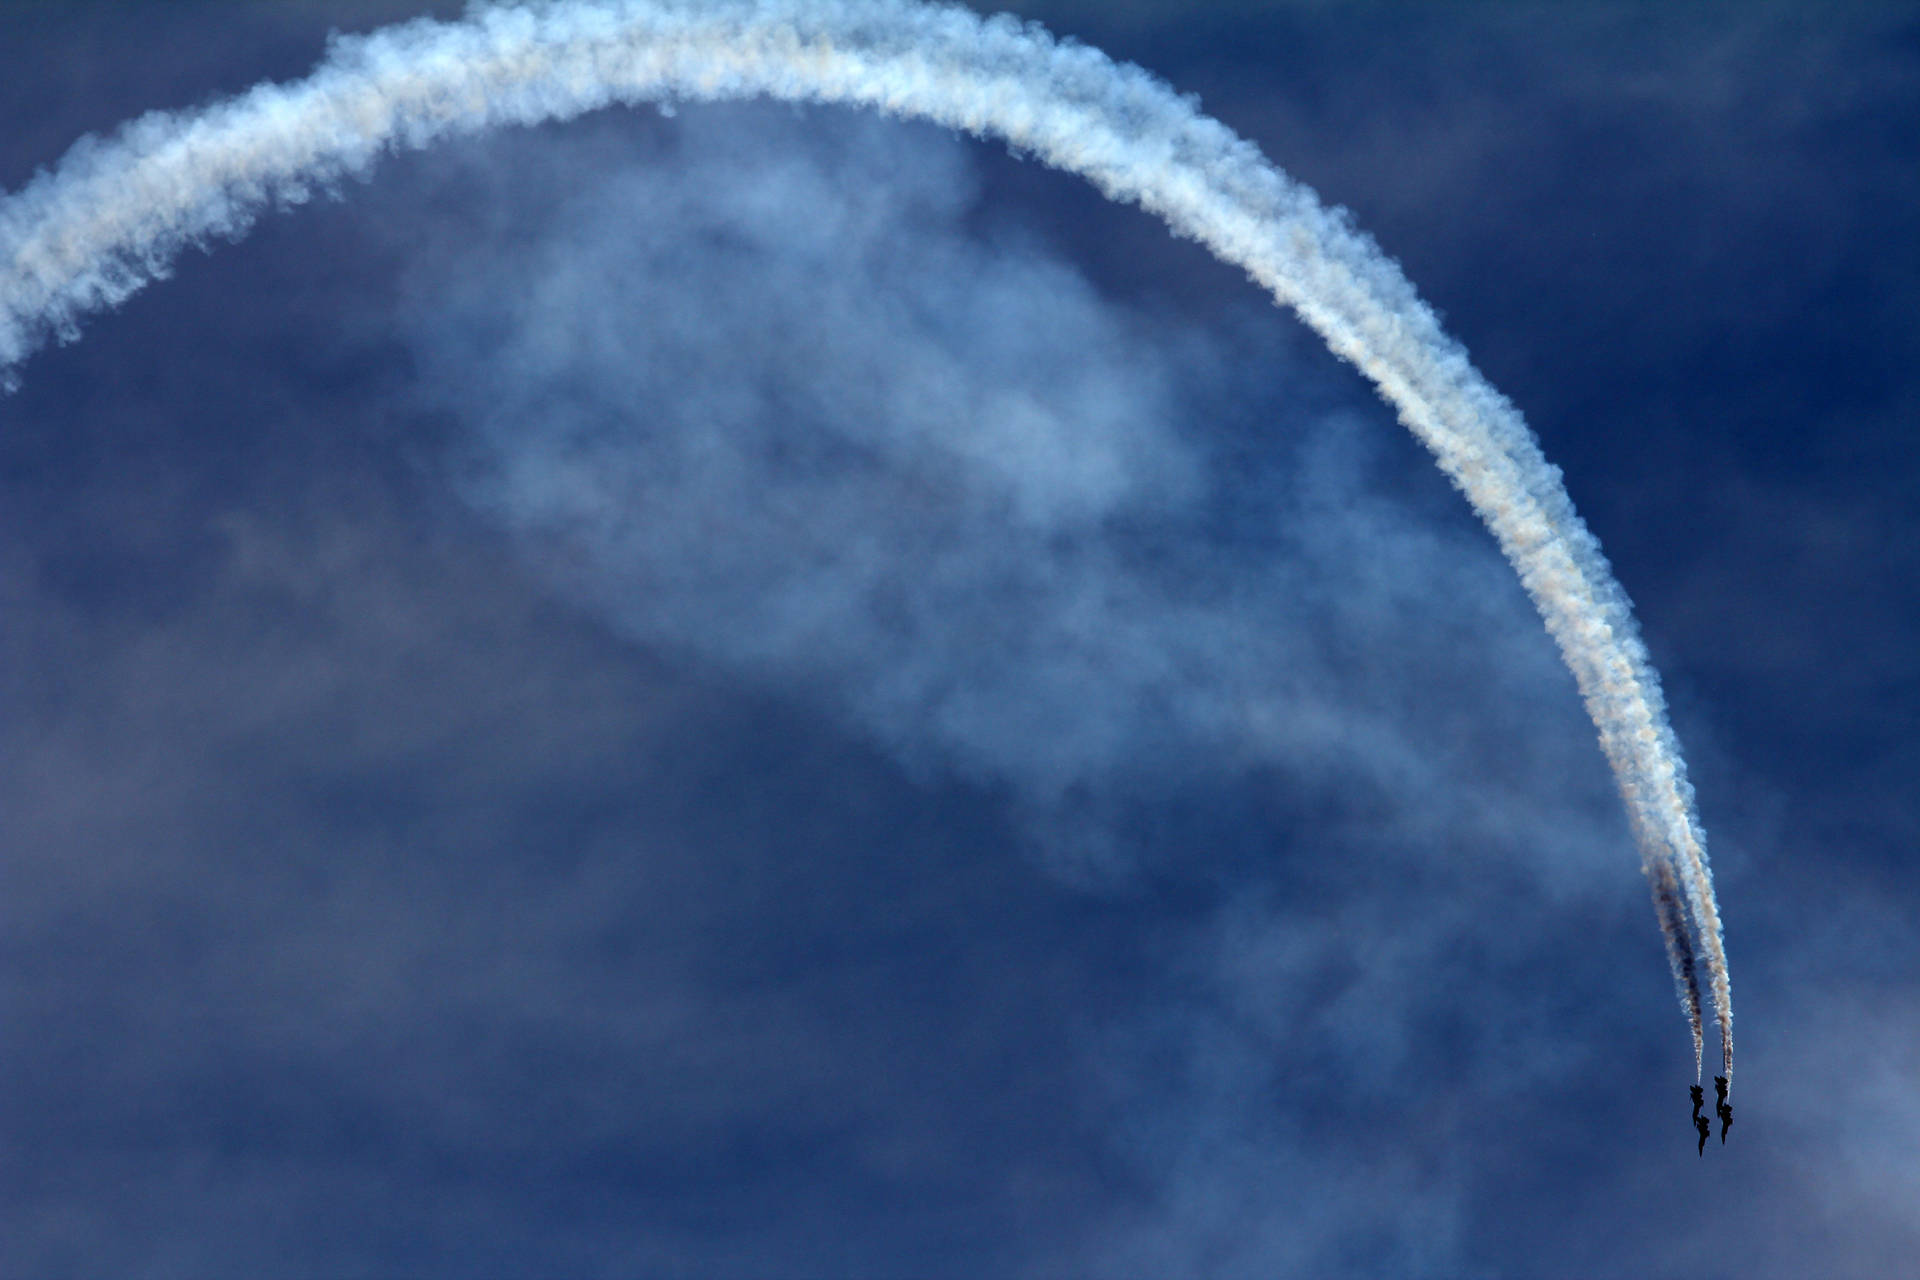 An Aerial Display of Aerobatic Stunts by an Airplane Wallpaper